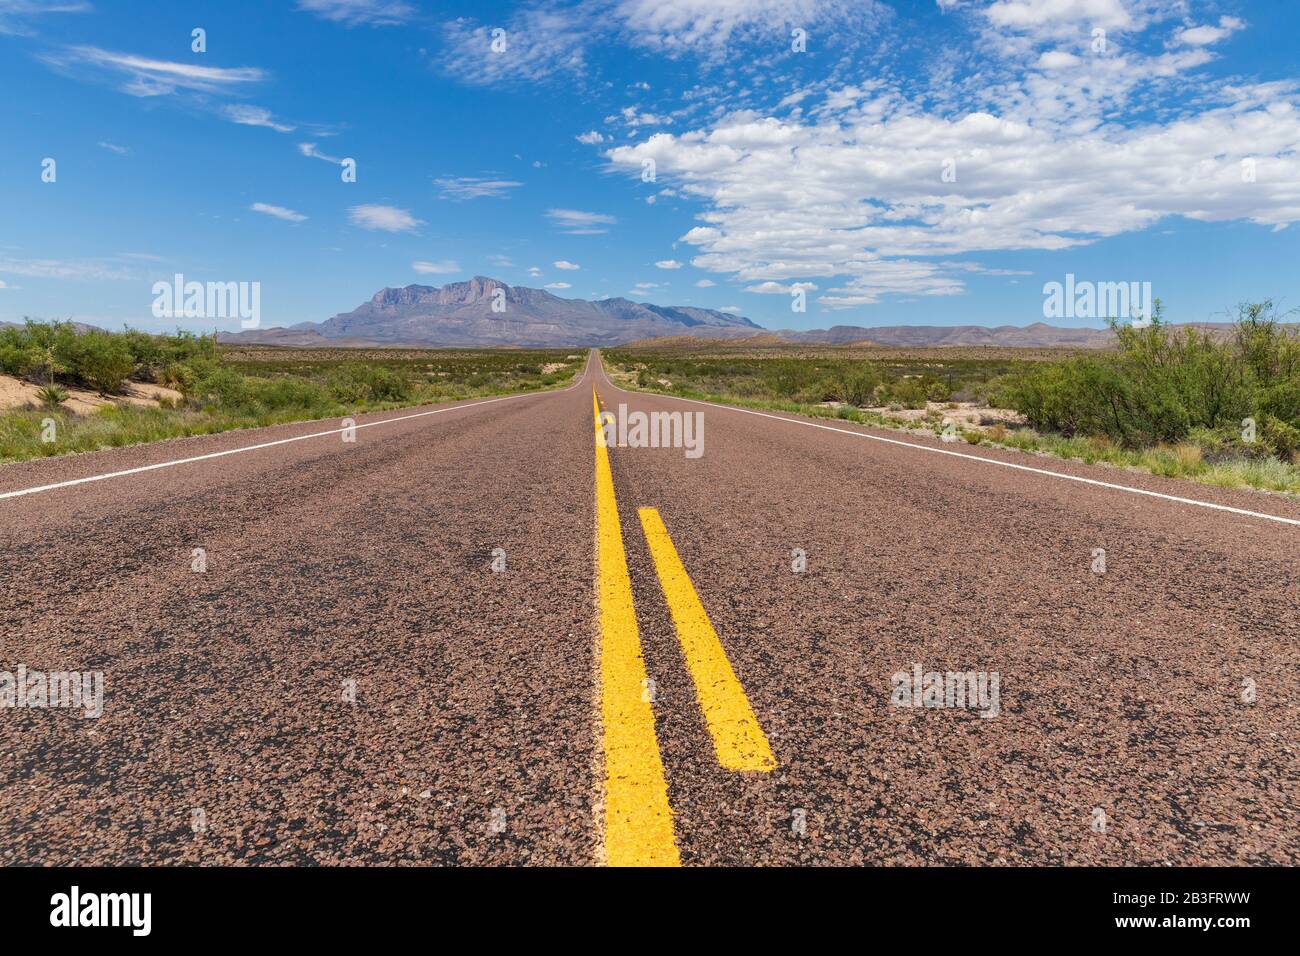 Long straight road in the desert, leading to a beautiful mountain range under a blue sky with clouds Stock Photo